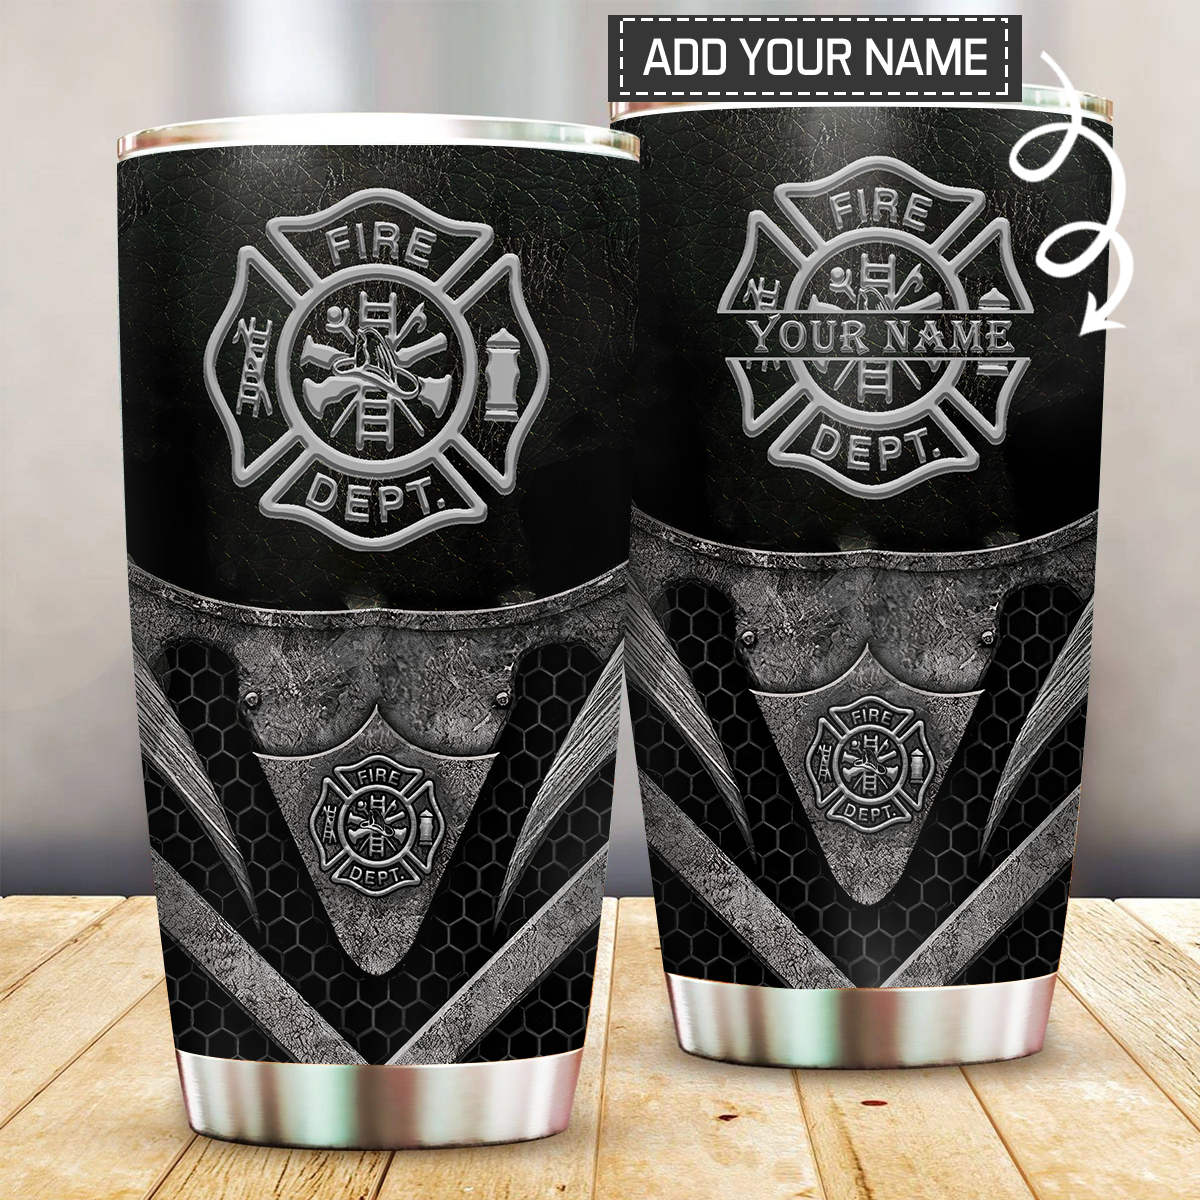 Firefighter Metal With Black And White Style – Tumbler - Owls Matrix LTD